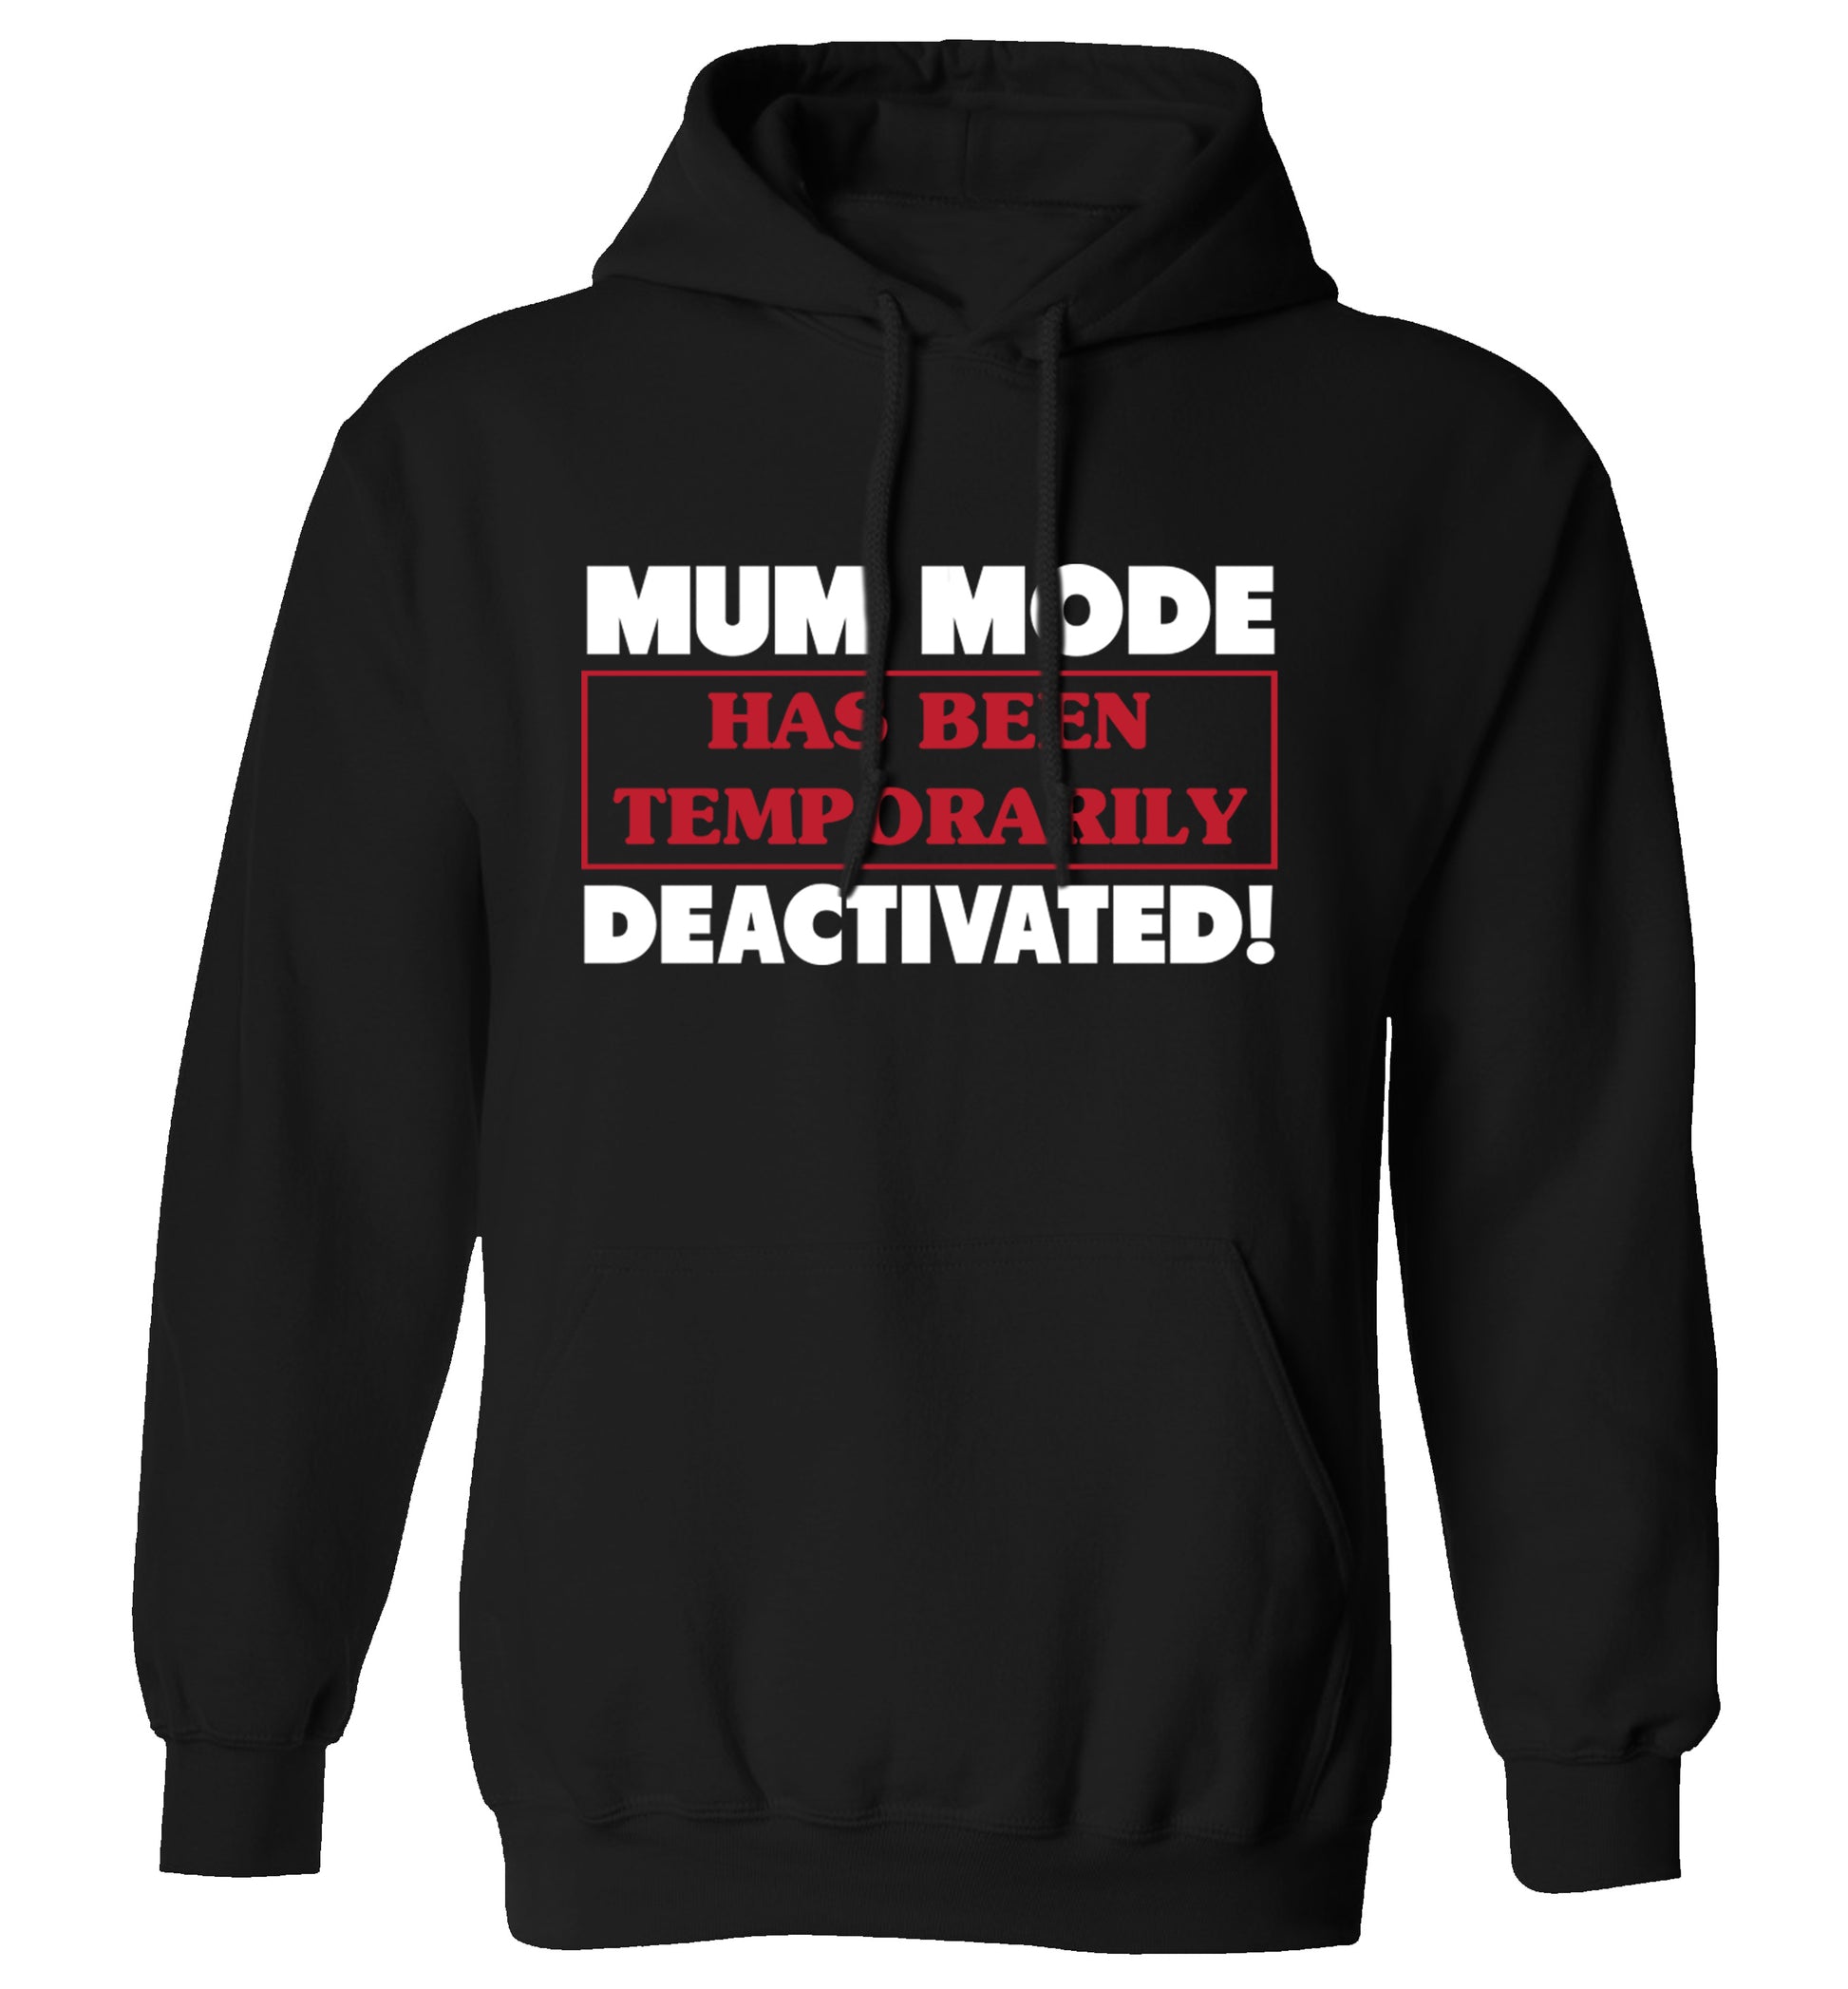 Mum mode has been temporarily deactivated! adults unisex black hoodie 2XL